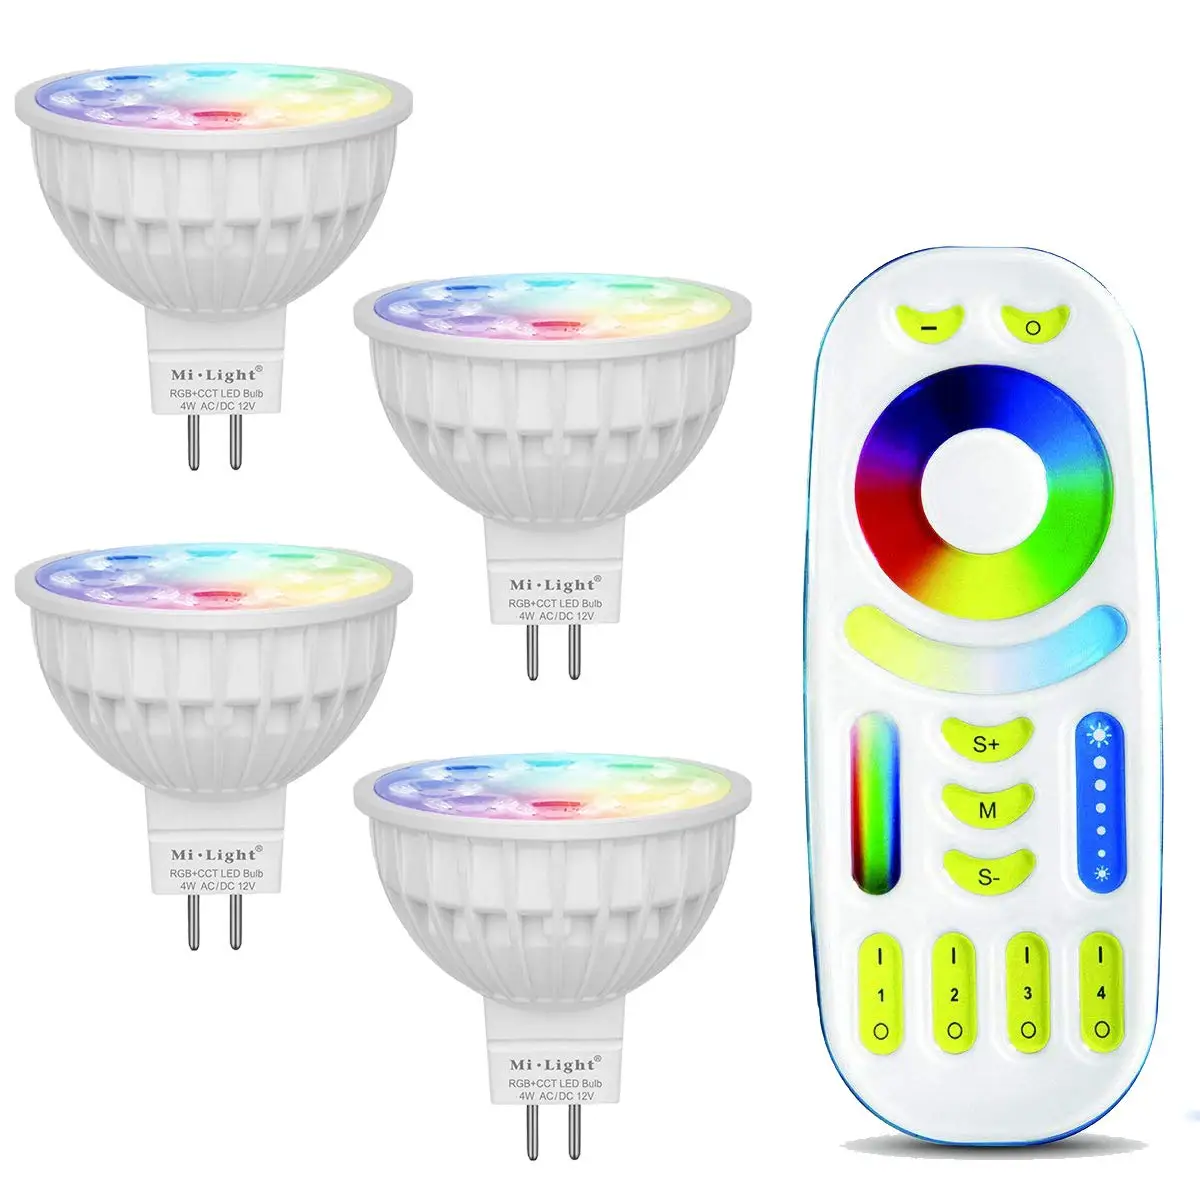 Mi-light Dimmable MR16 4W Led Bulb RGBW/WW LED Spotlight Smart Led Lamp with Touch Remote